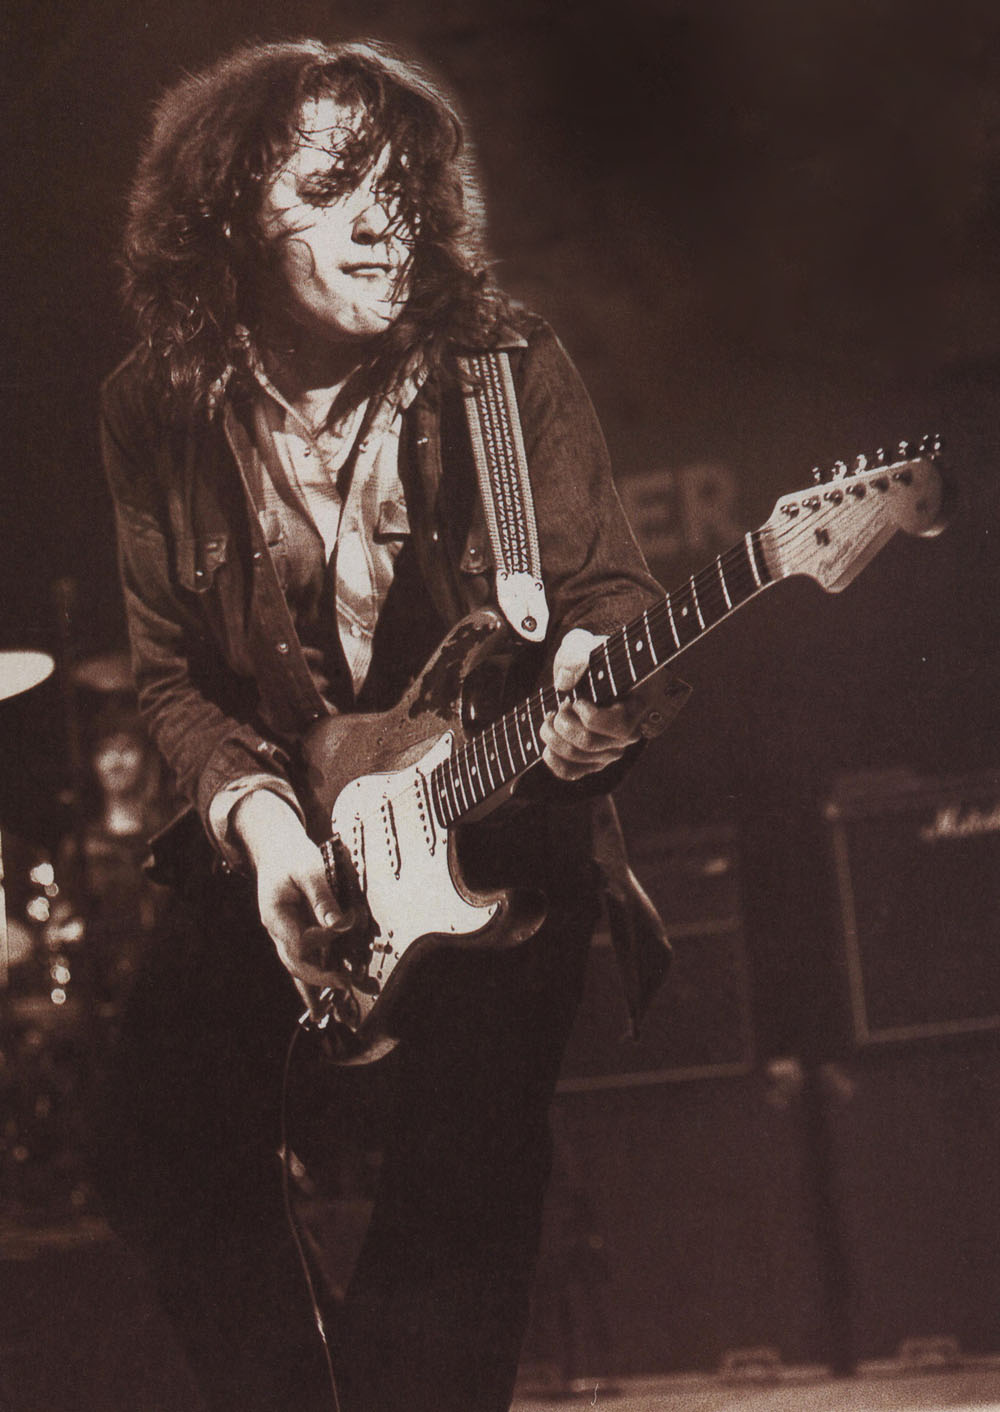 Darius Don T You Get The Feelin Rory Gallagher Have A Drink On Me 19 Bootleg